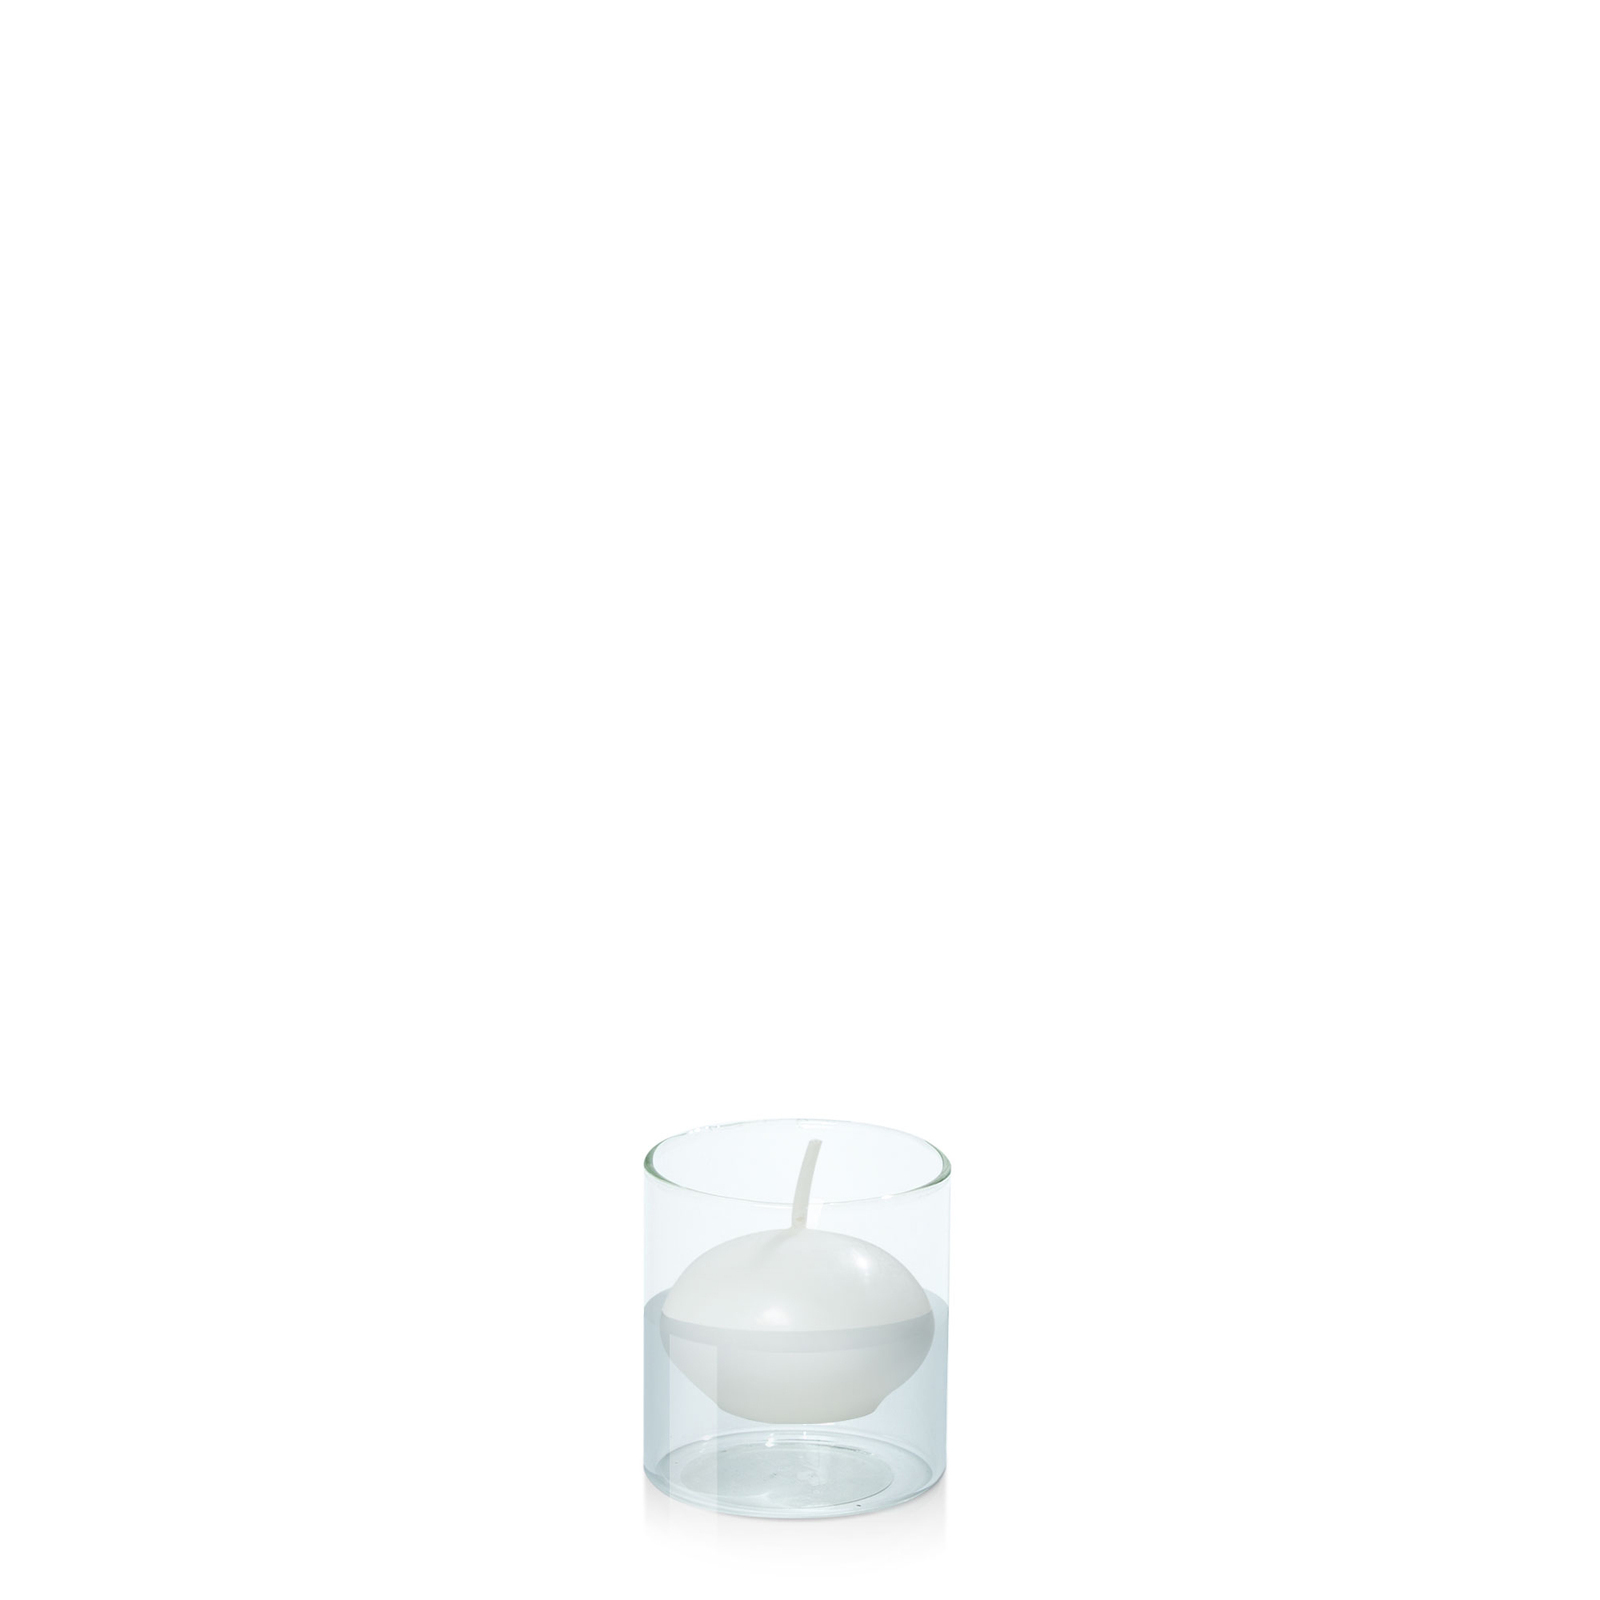 4cm Floating Candle in 5.8cm x 7cm Glass